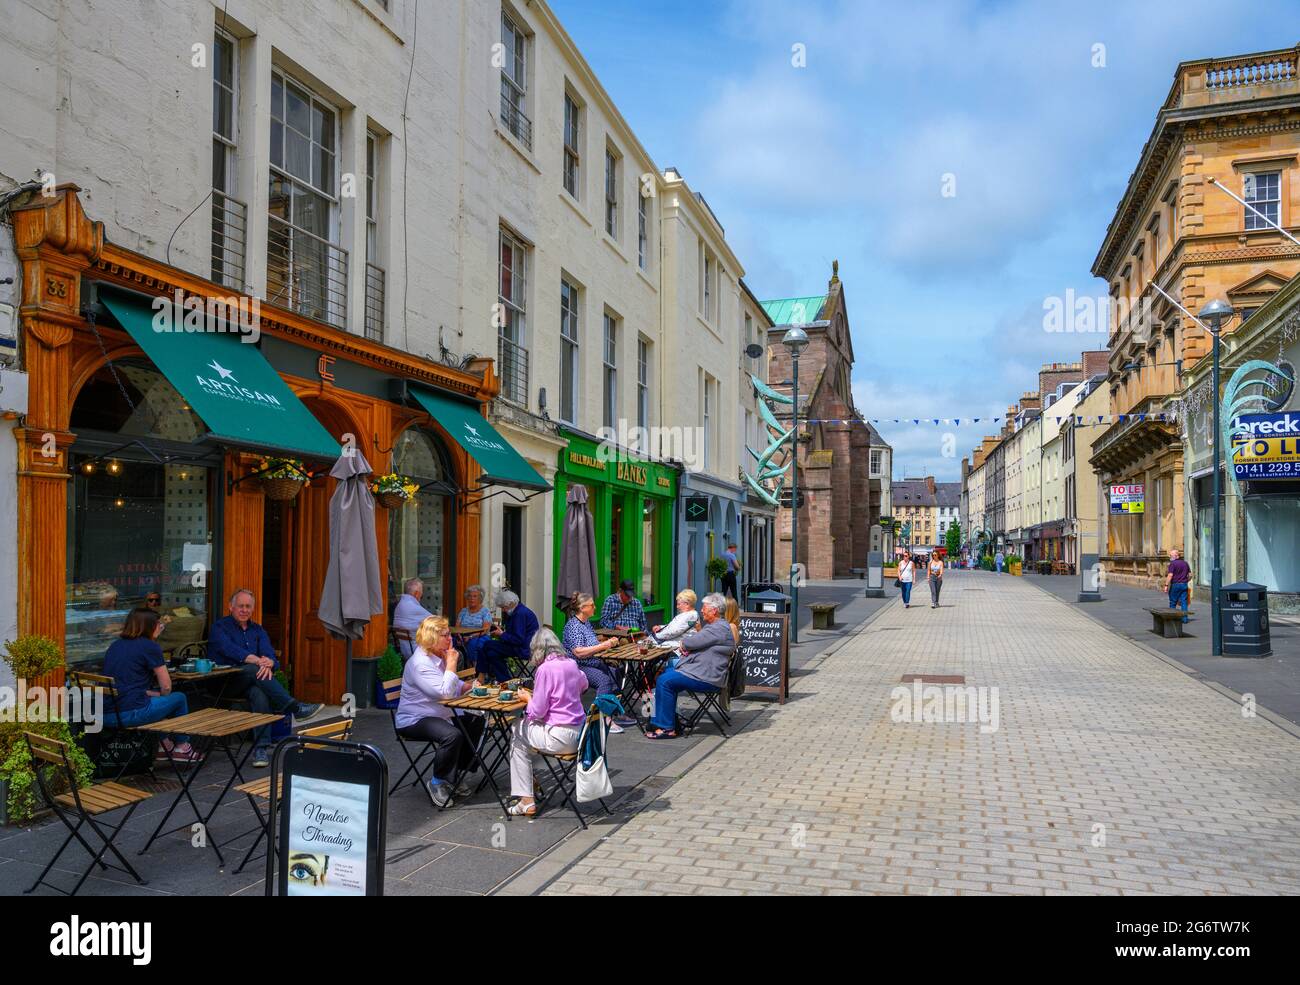 Shops and cafes on St John's Street in the town centre, Perth, Scotland, UK Stock Photo